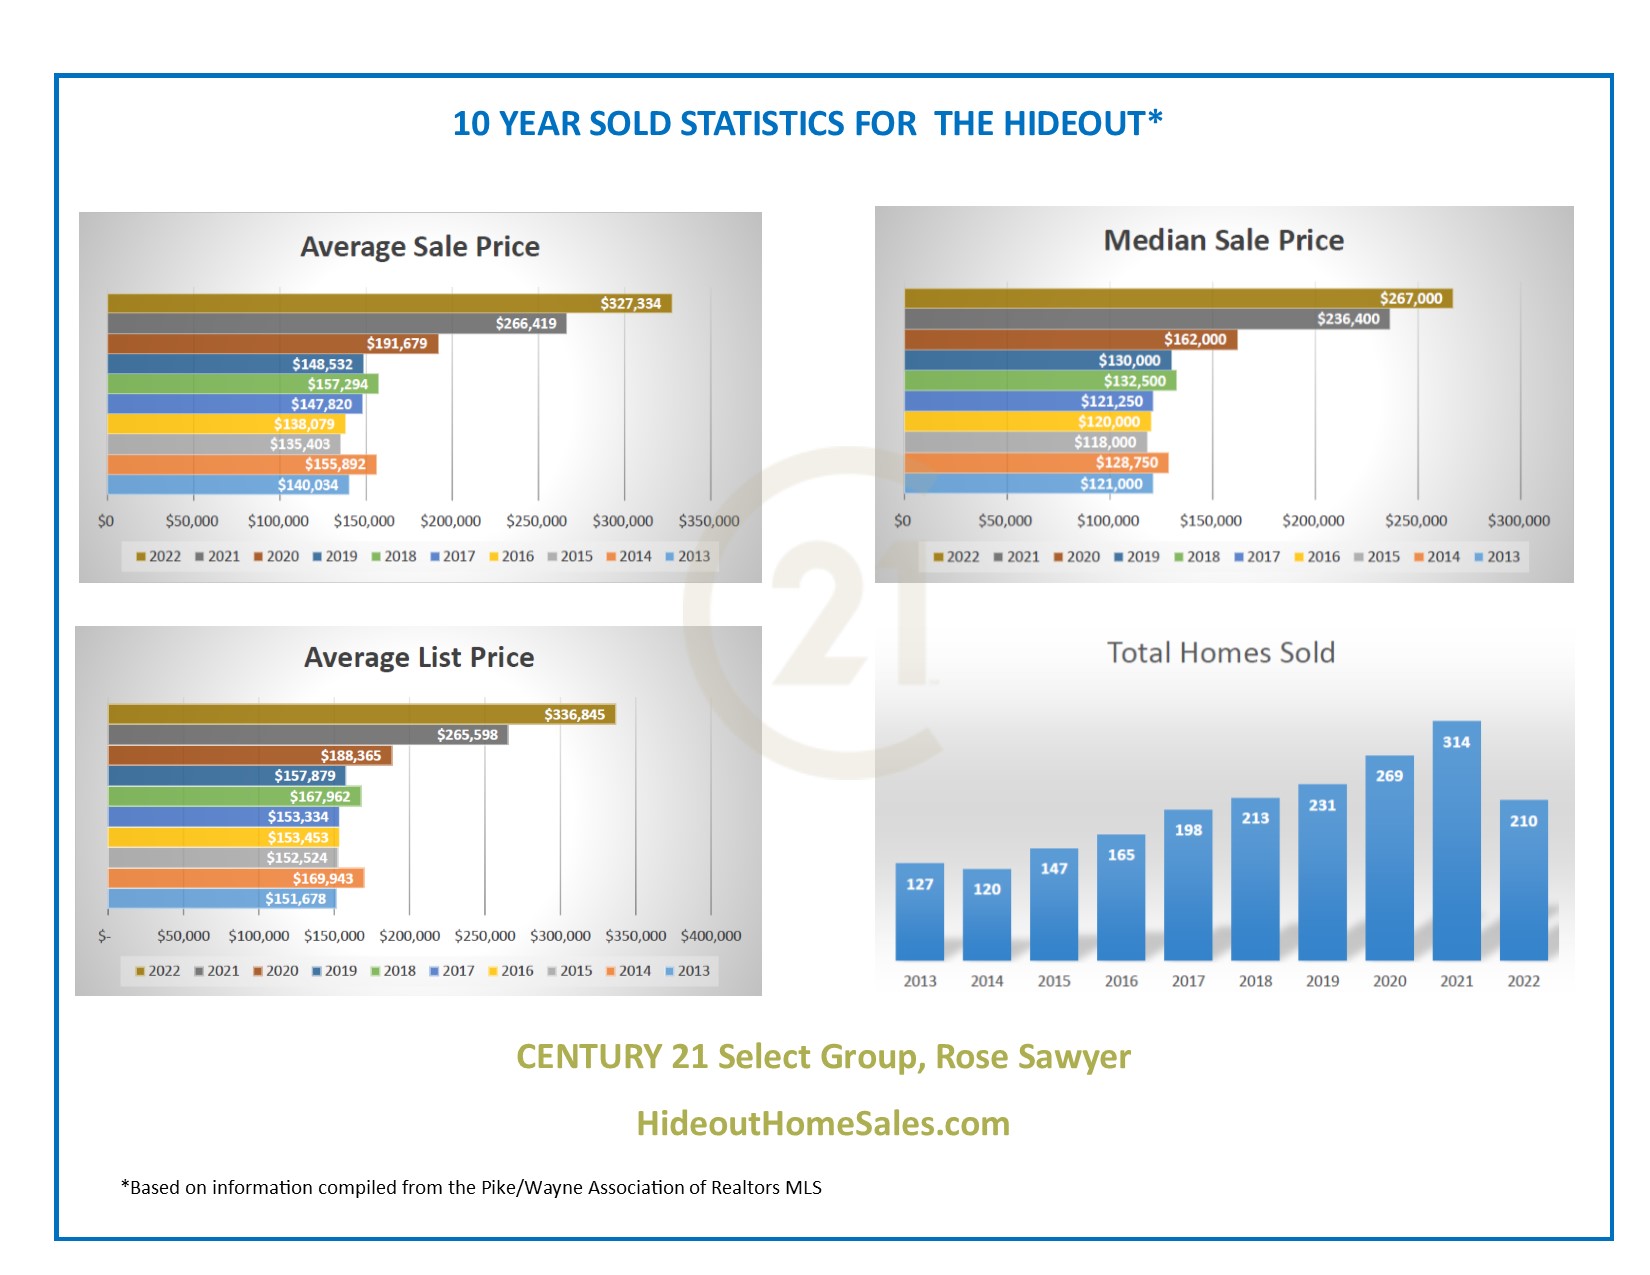 Ten Year Sales Statistics for The Hideout